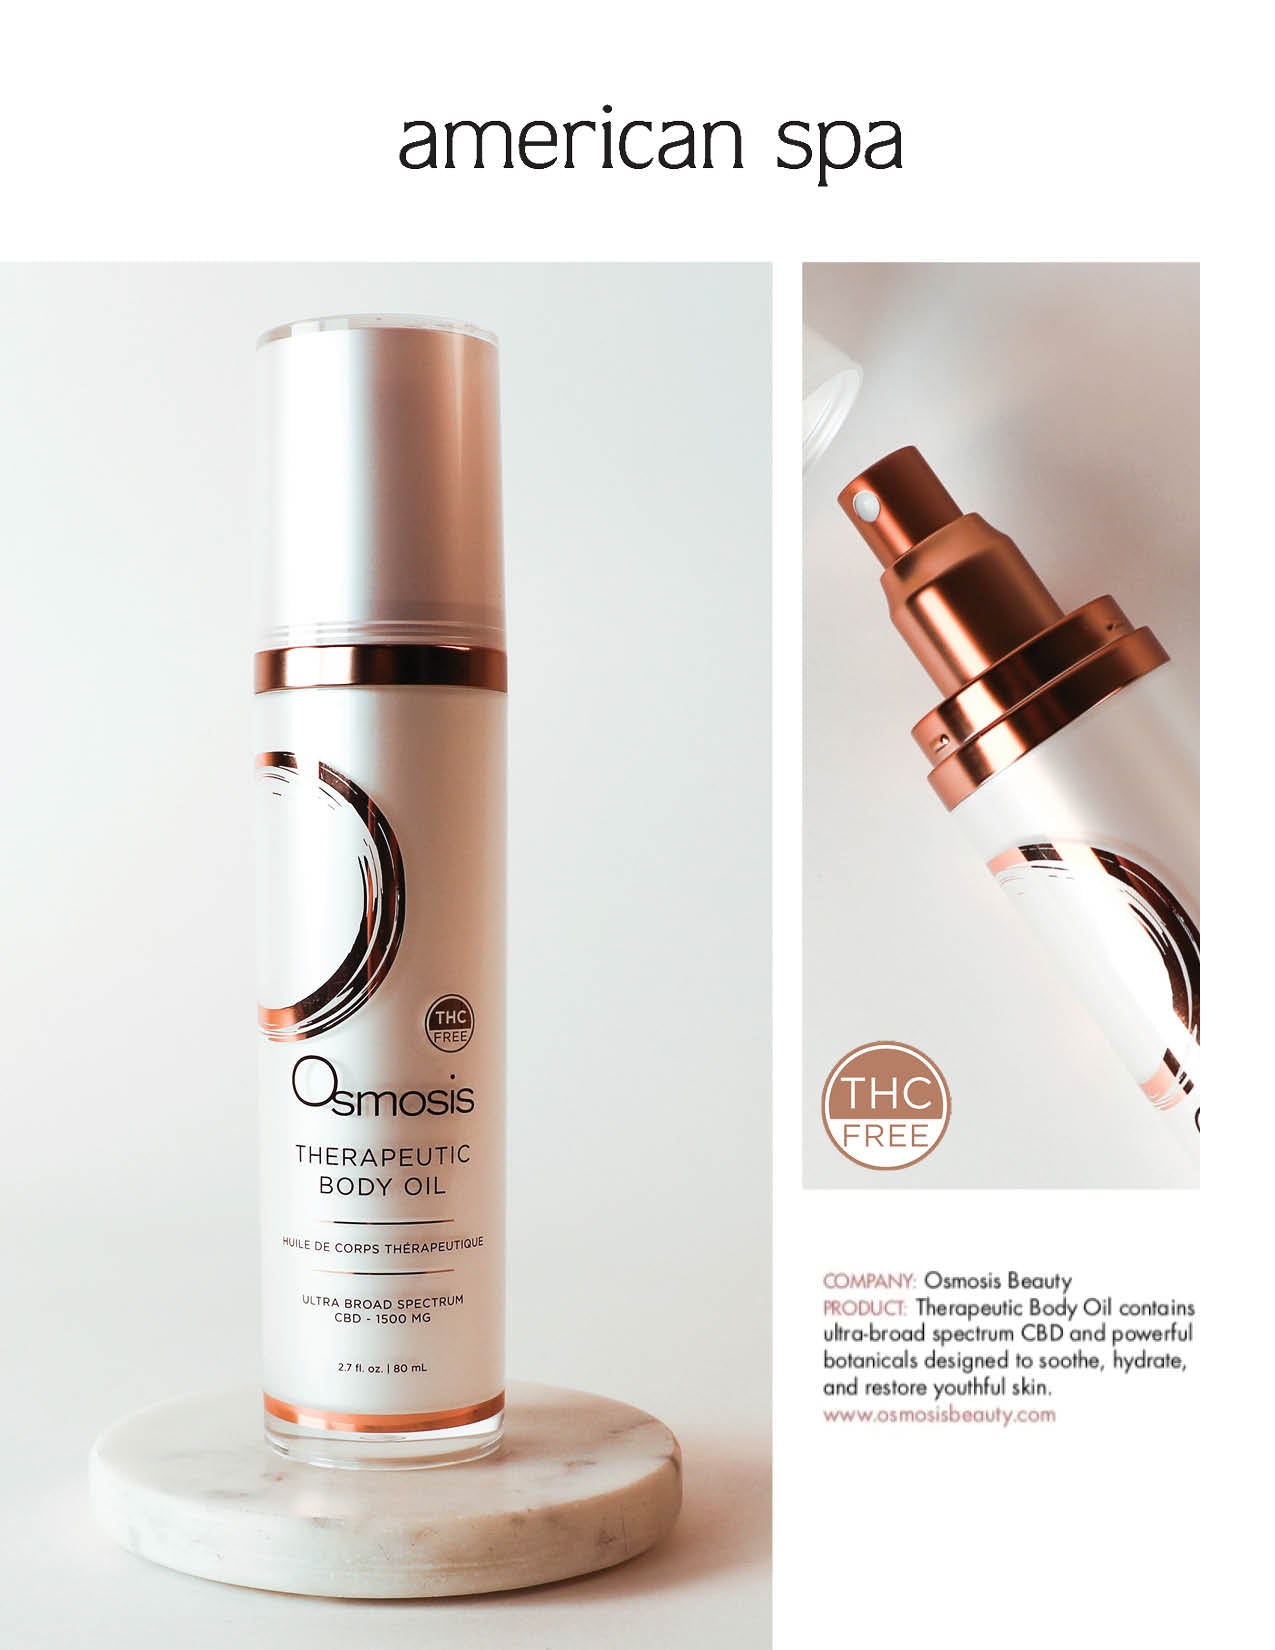 Therapeutic Body Oil was featured in the new product section in the March/April issue of American Spa